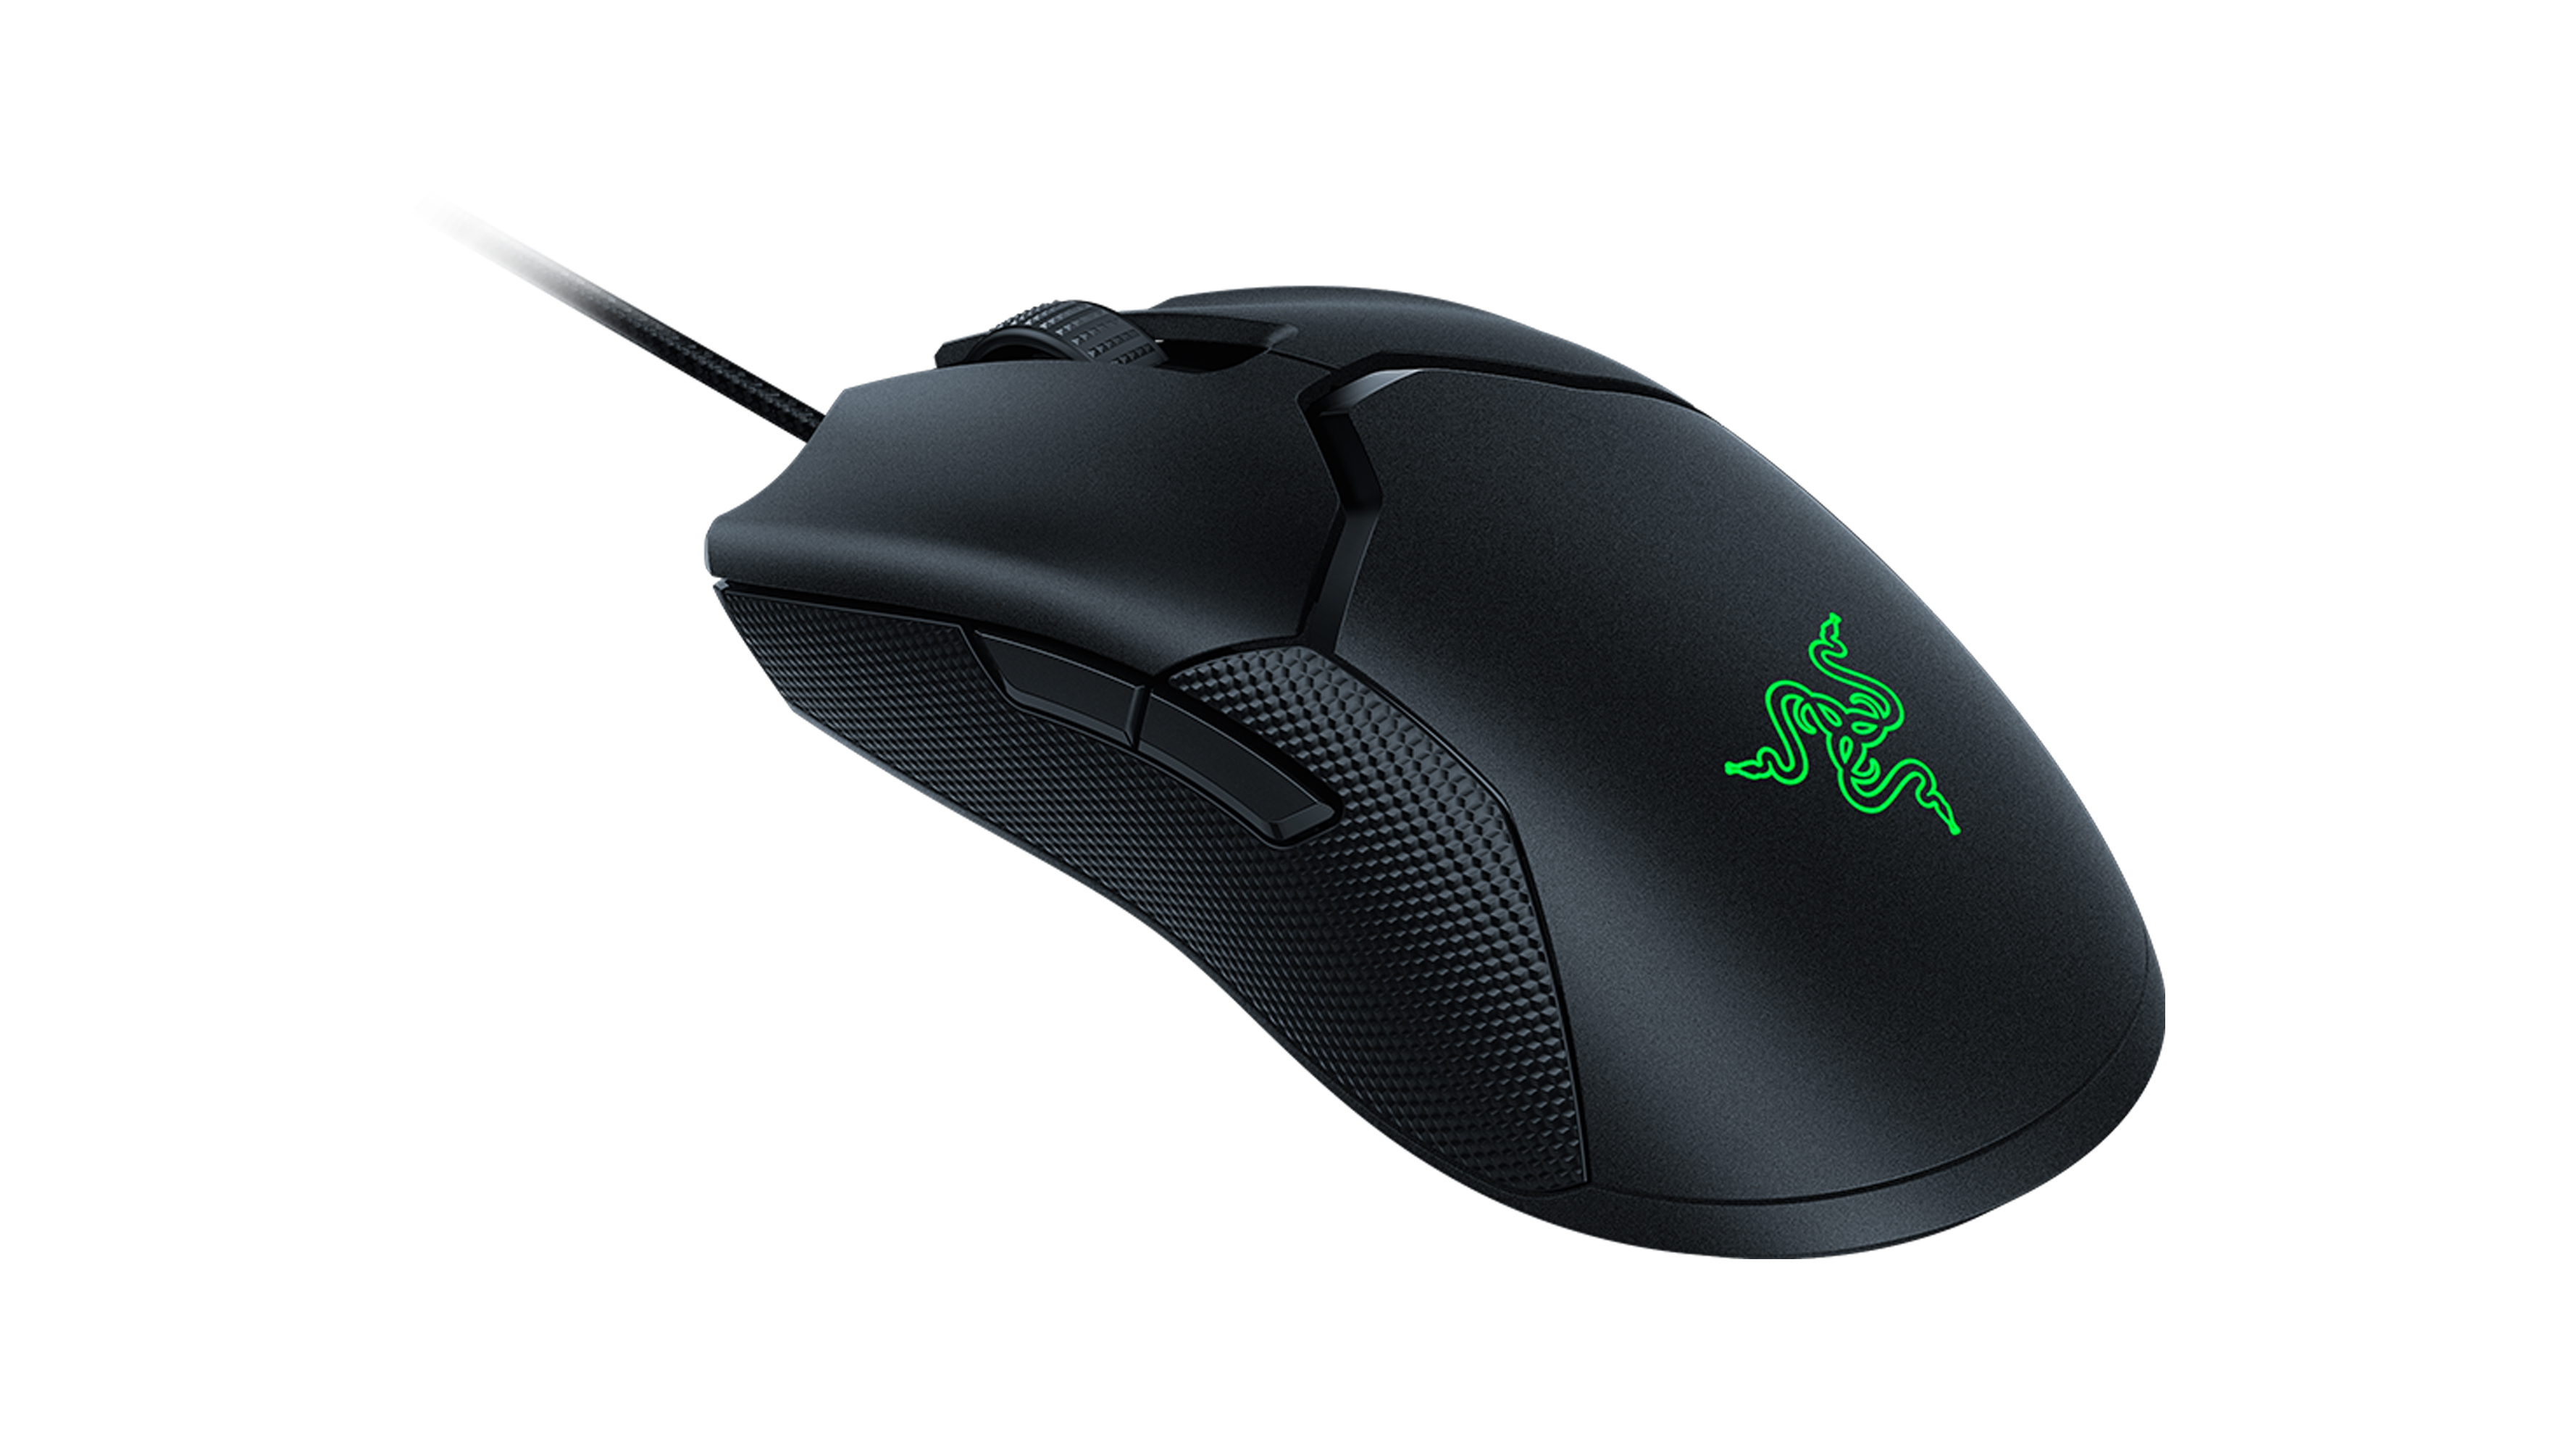 The Razer Viper 8K is the fastest gaming mouse on this list.